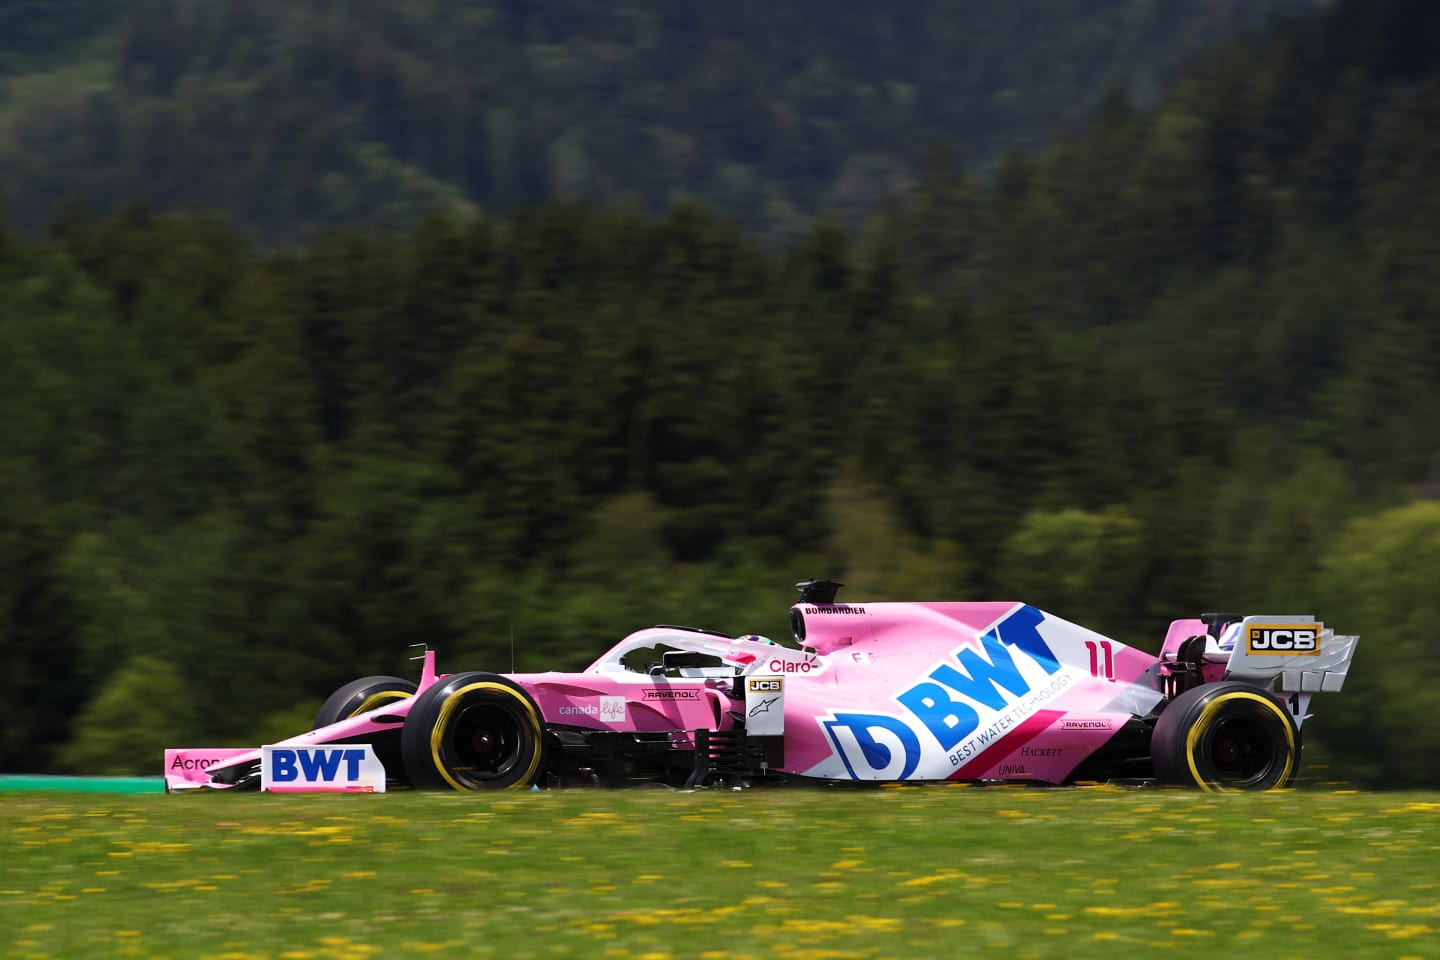 SPIELBERG, AUSTRIA - JULY 04: Sergio Perez of Mexico driving the (11) Racing Point RP20 Mercedes on track during final practice for the Formula One Grand Prix of Austria at Red Bull Ring on July 04, 2020 in Spielberg, Austria. (Photo by Bryn Lennon/Getty Images)